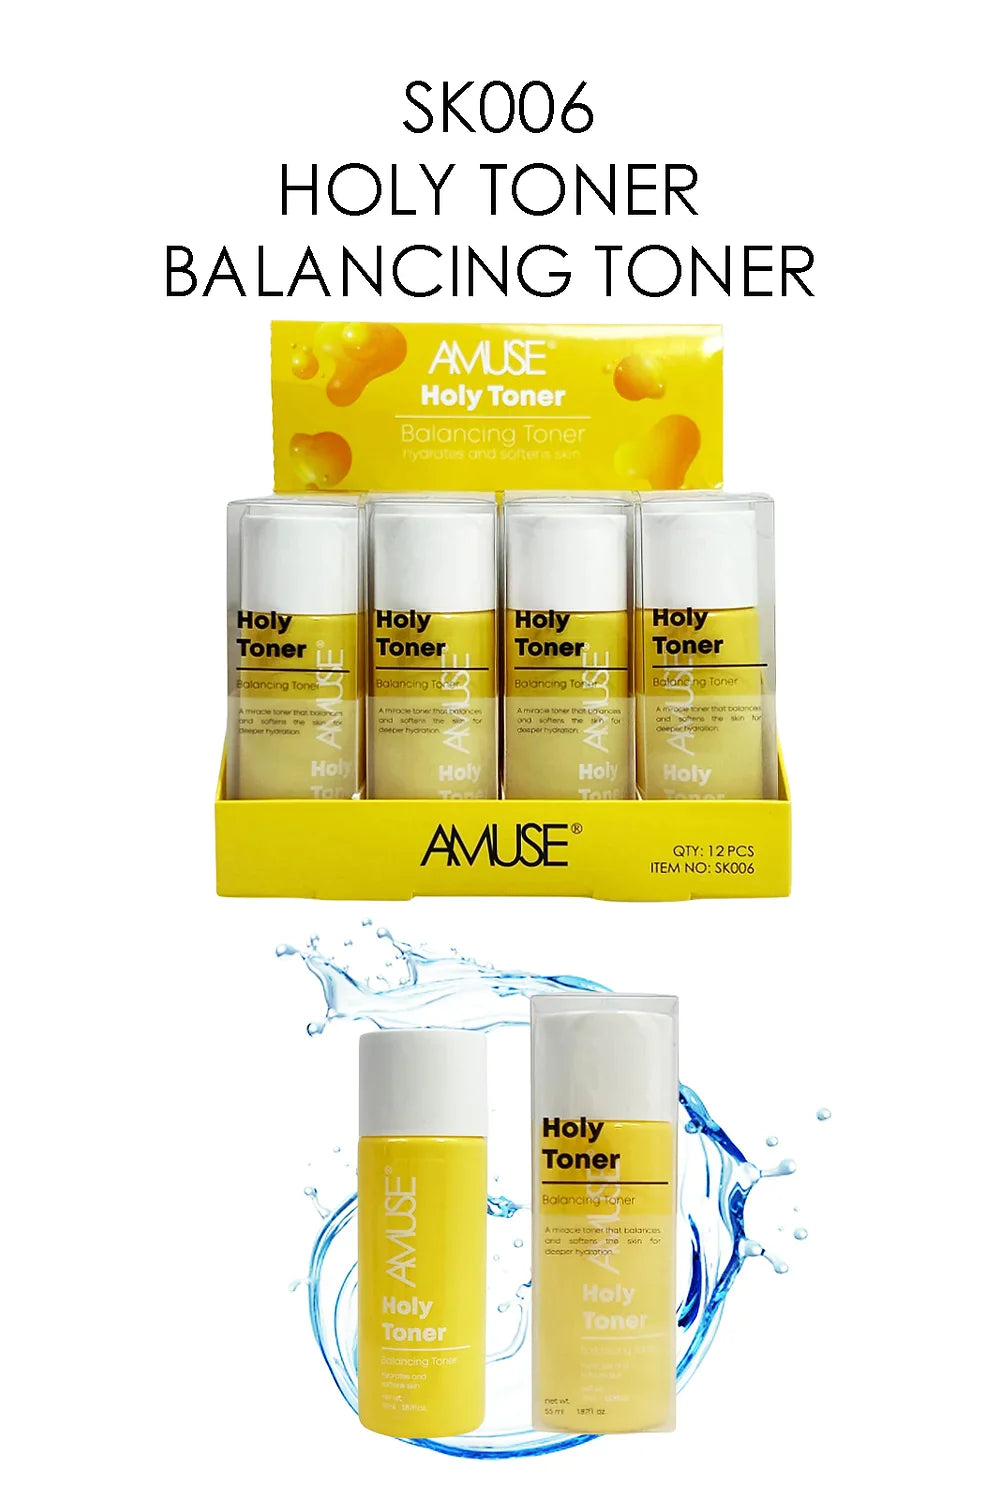 Balancing Toner Refreshes and nourishes skin Lightweight fluid formula Use twice daily after cleansing skin Cruelty Free. The best price, deal and quality w/ Bonitawholesale.com